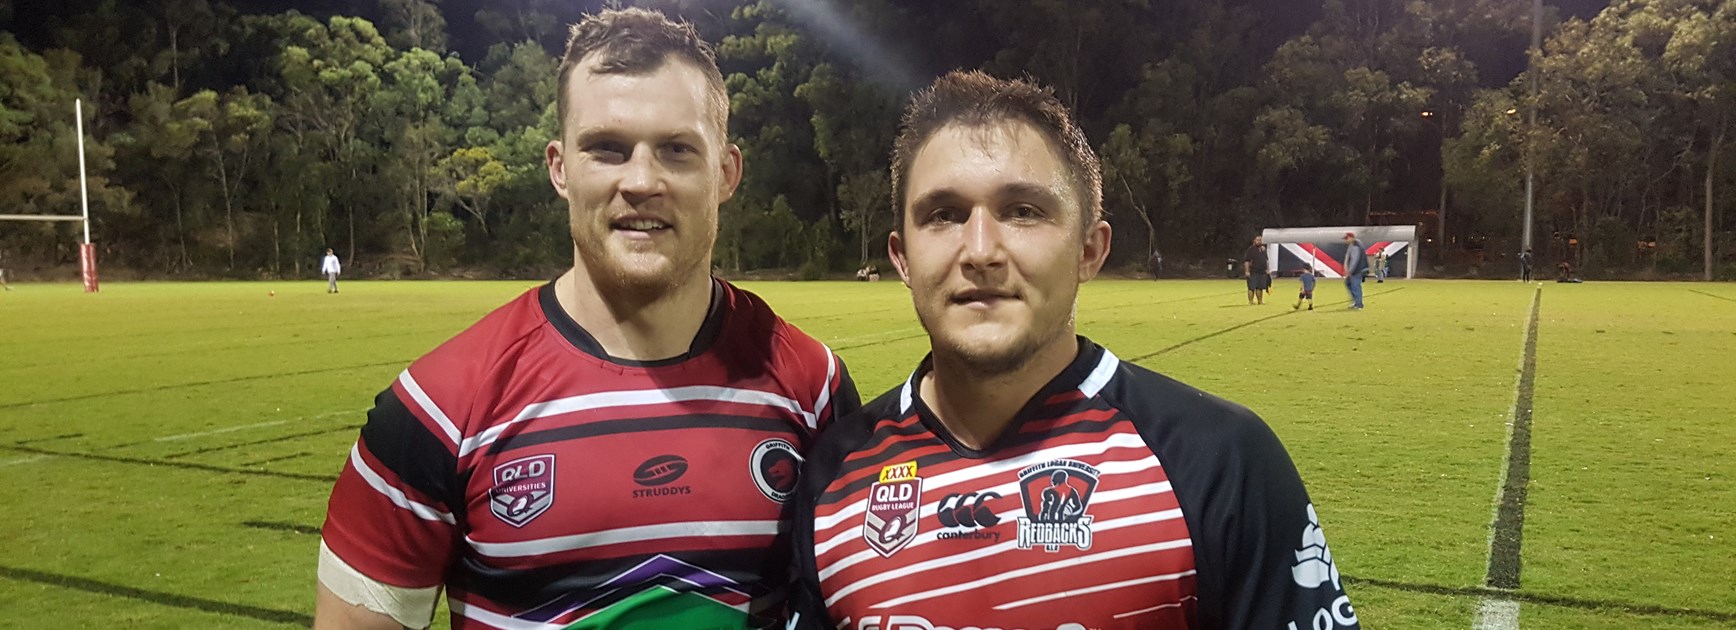 Dragons to face Hounds in Universities decider